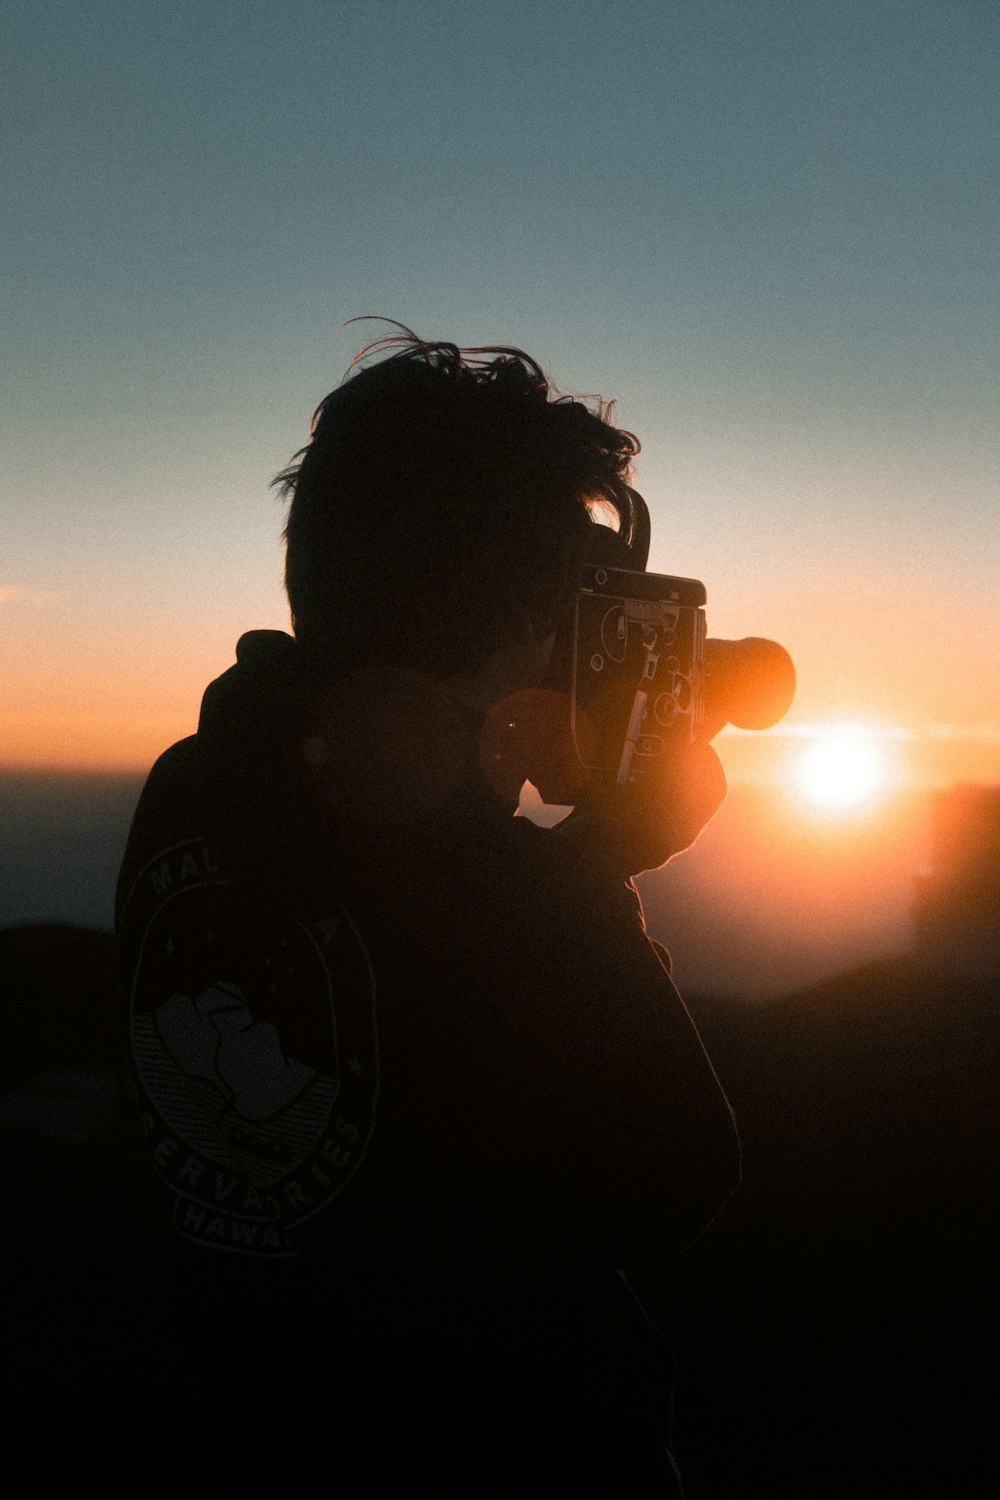 man holding classic camera during golden hour